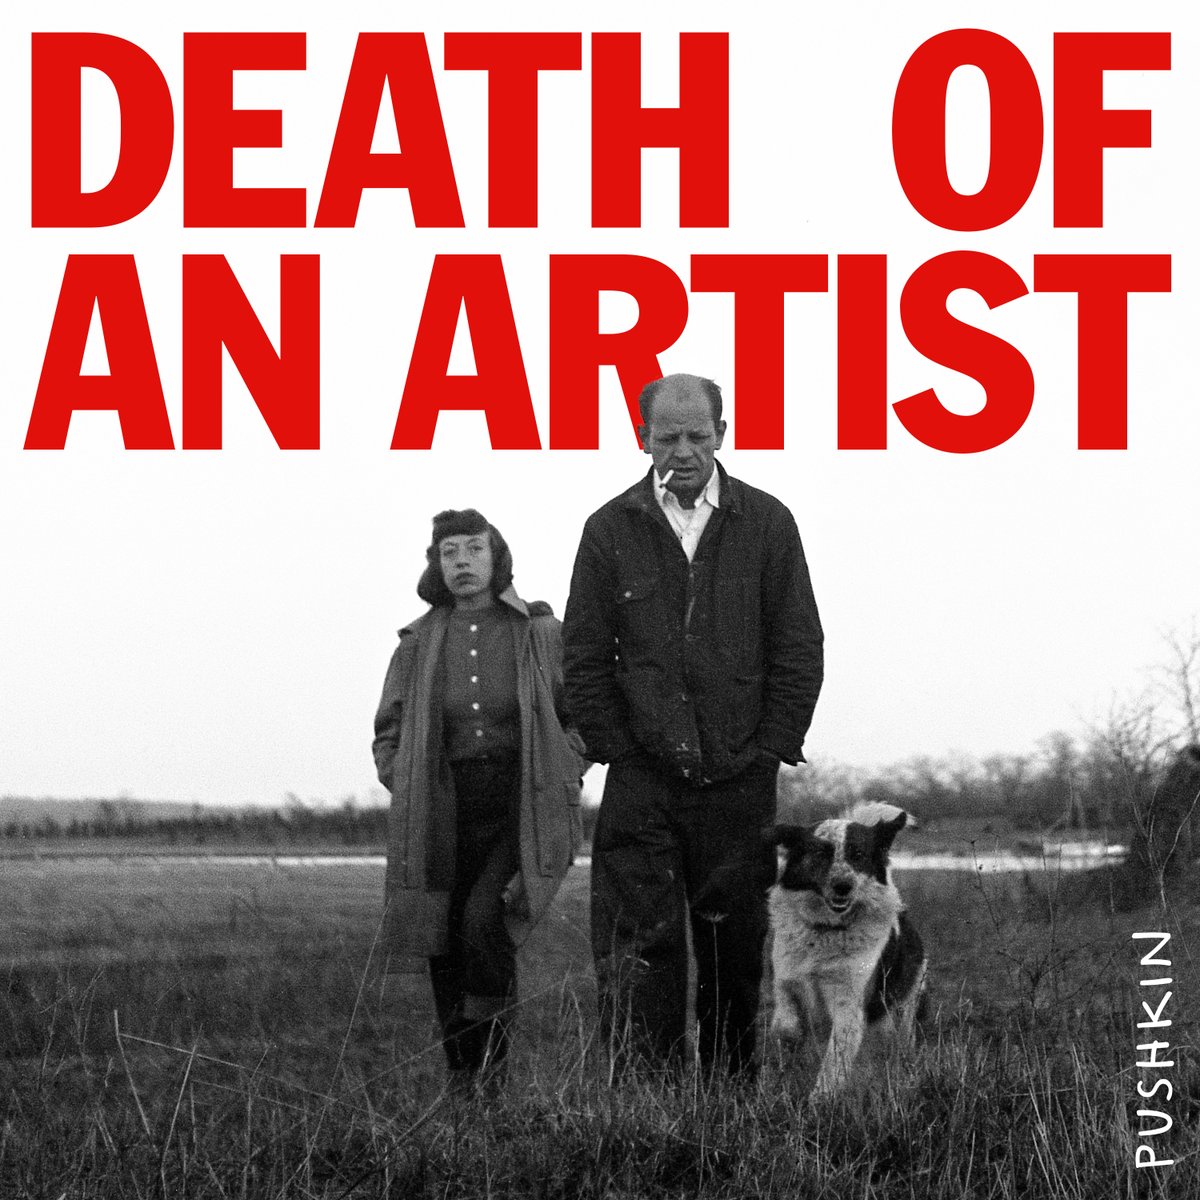 #DeathOfAnArtist, S2🖌️This is the story behind Jackson Pollock, and the woman who made him famous, changing the landscape of modern art forever—his wife, artist Lee Krasner. Hosted by art historian @KatyHessel, new eps start 5/17! Learn more @artnet: bit.ly/3wrT9Zl